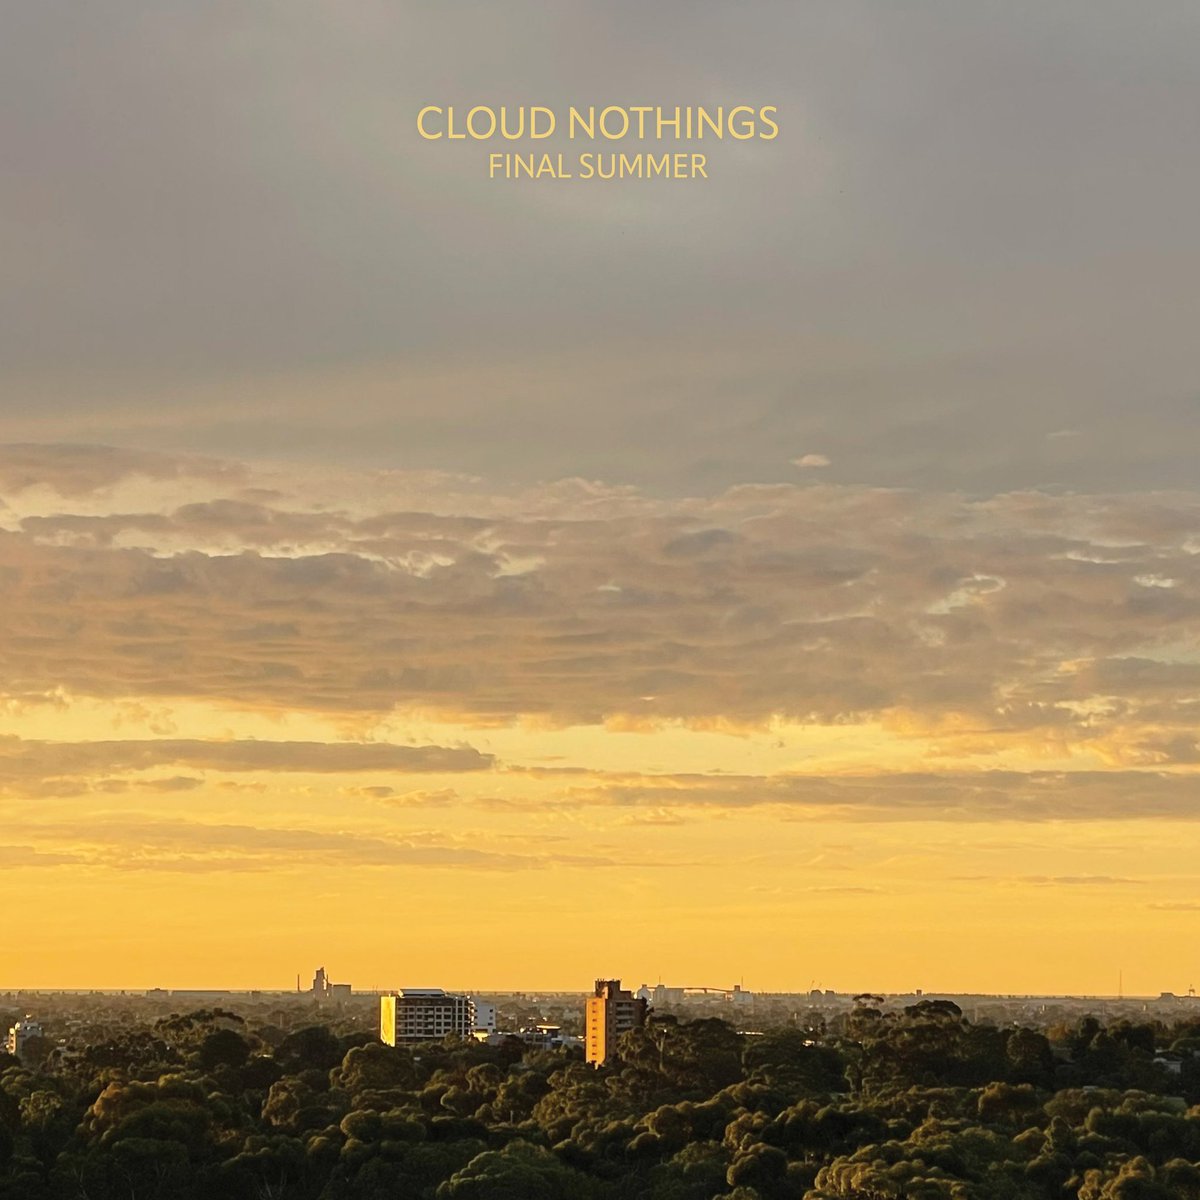 Another significant influence for me is the writing style of Dylan Baldi from @cloudnothings. By the way, they’ve just released another impressive record called ‘Final Summer,’ which I highly recommend checking out if you haven’t already!